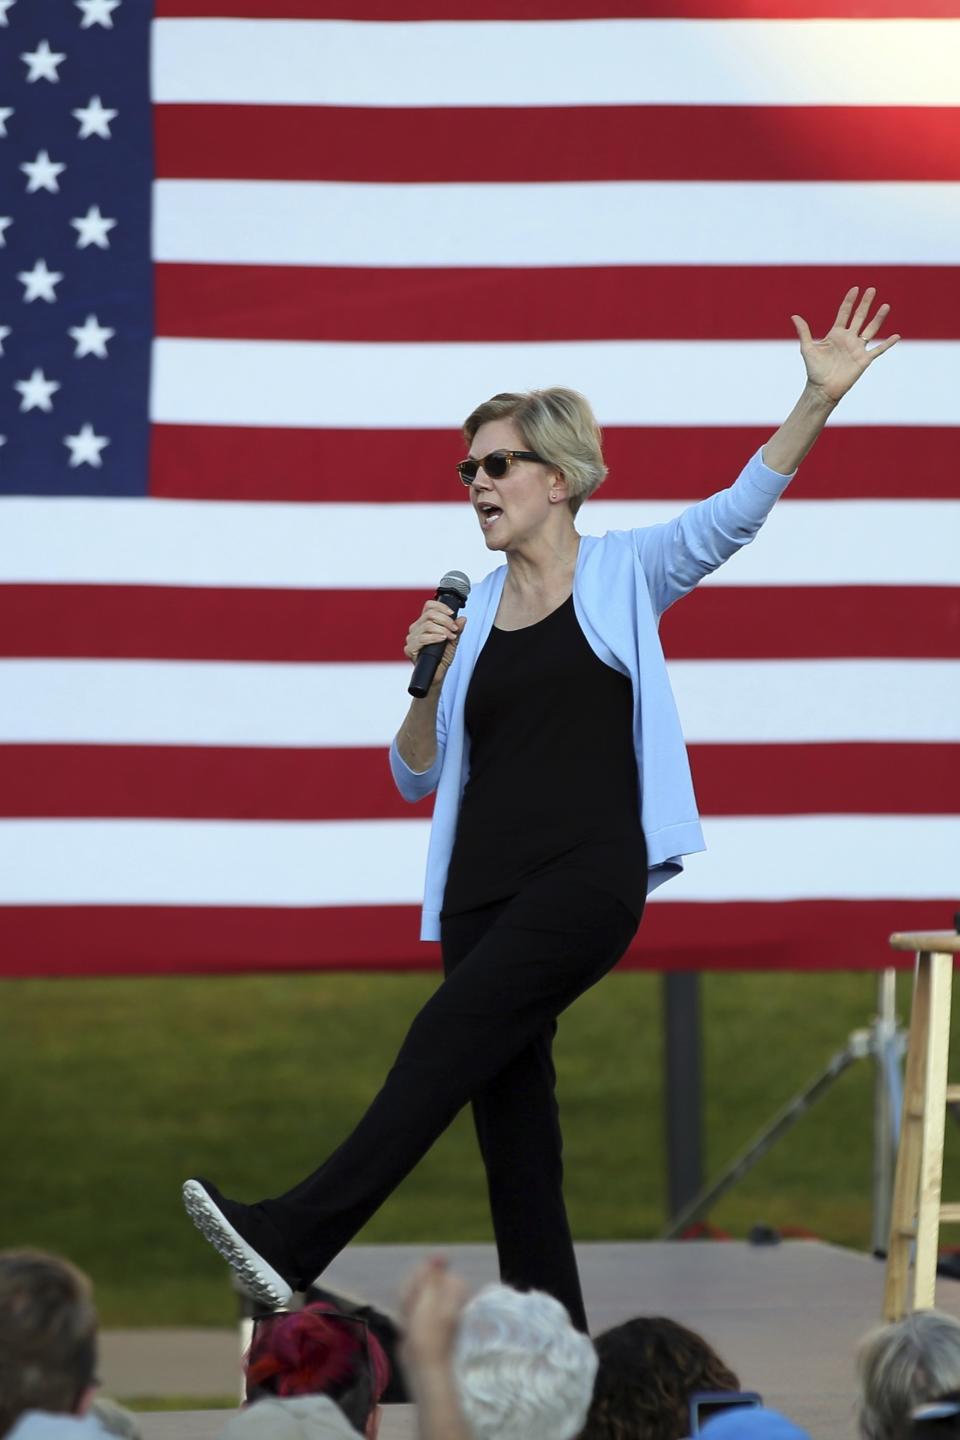 Democratic presidential candidate Elizabeth Warren, D-Mass., speaks during a rally Monday, Aug. 19, 2019, at Macalaster College during a campaign appearance in St. Paul, Minn. (AP Photo/Jim Mone)